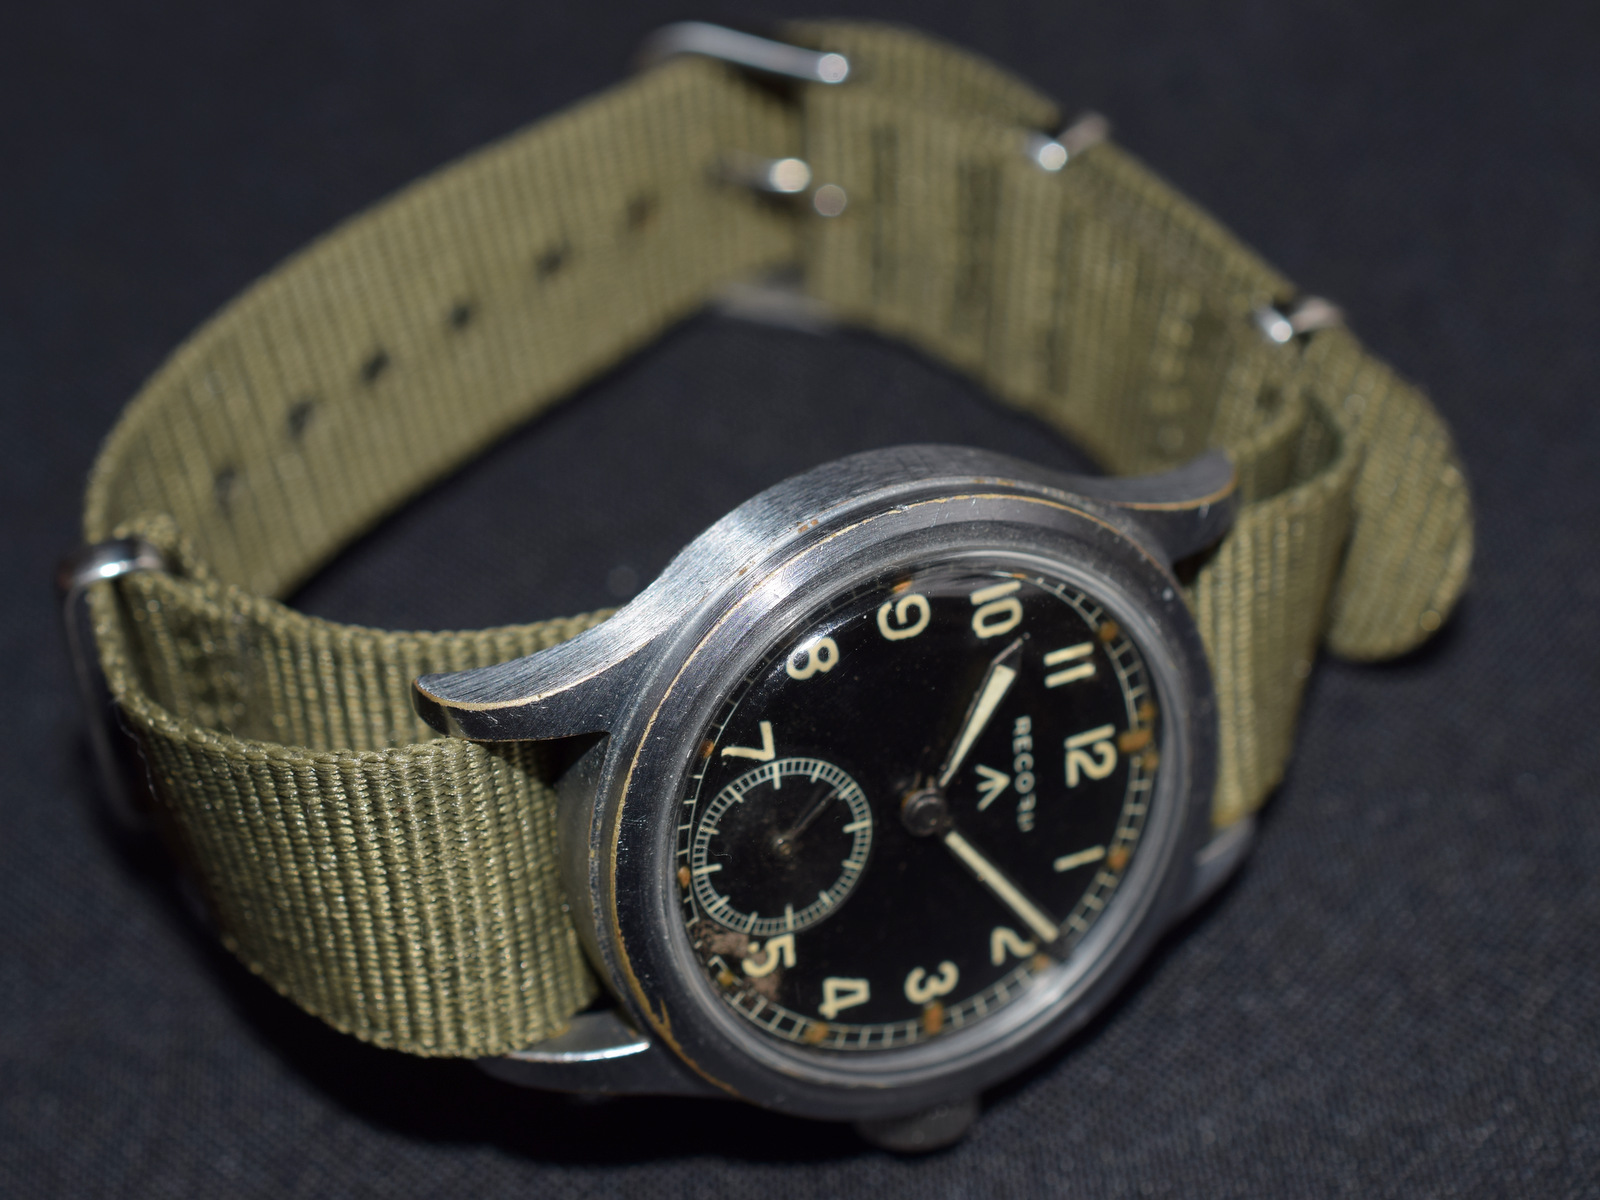 Very Collectable Dirty Dozen Record WW2 Wristwatch - Image 5 of 8